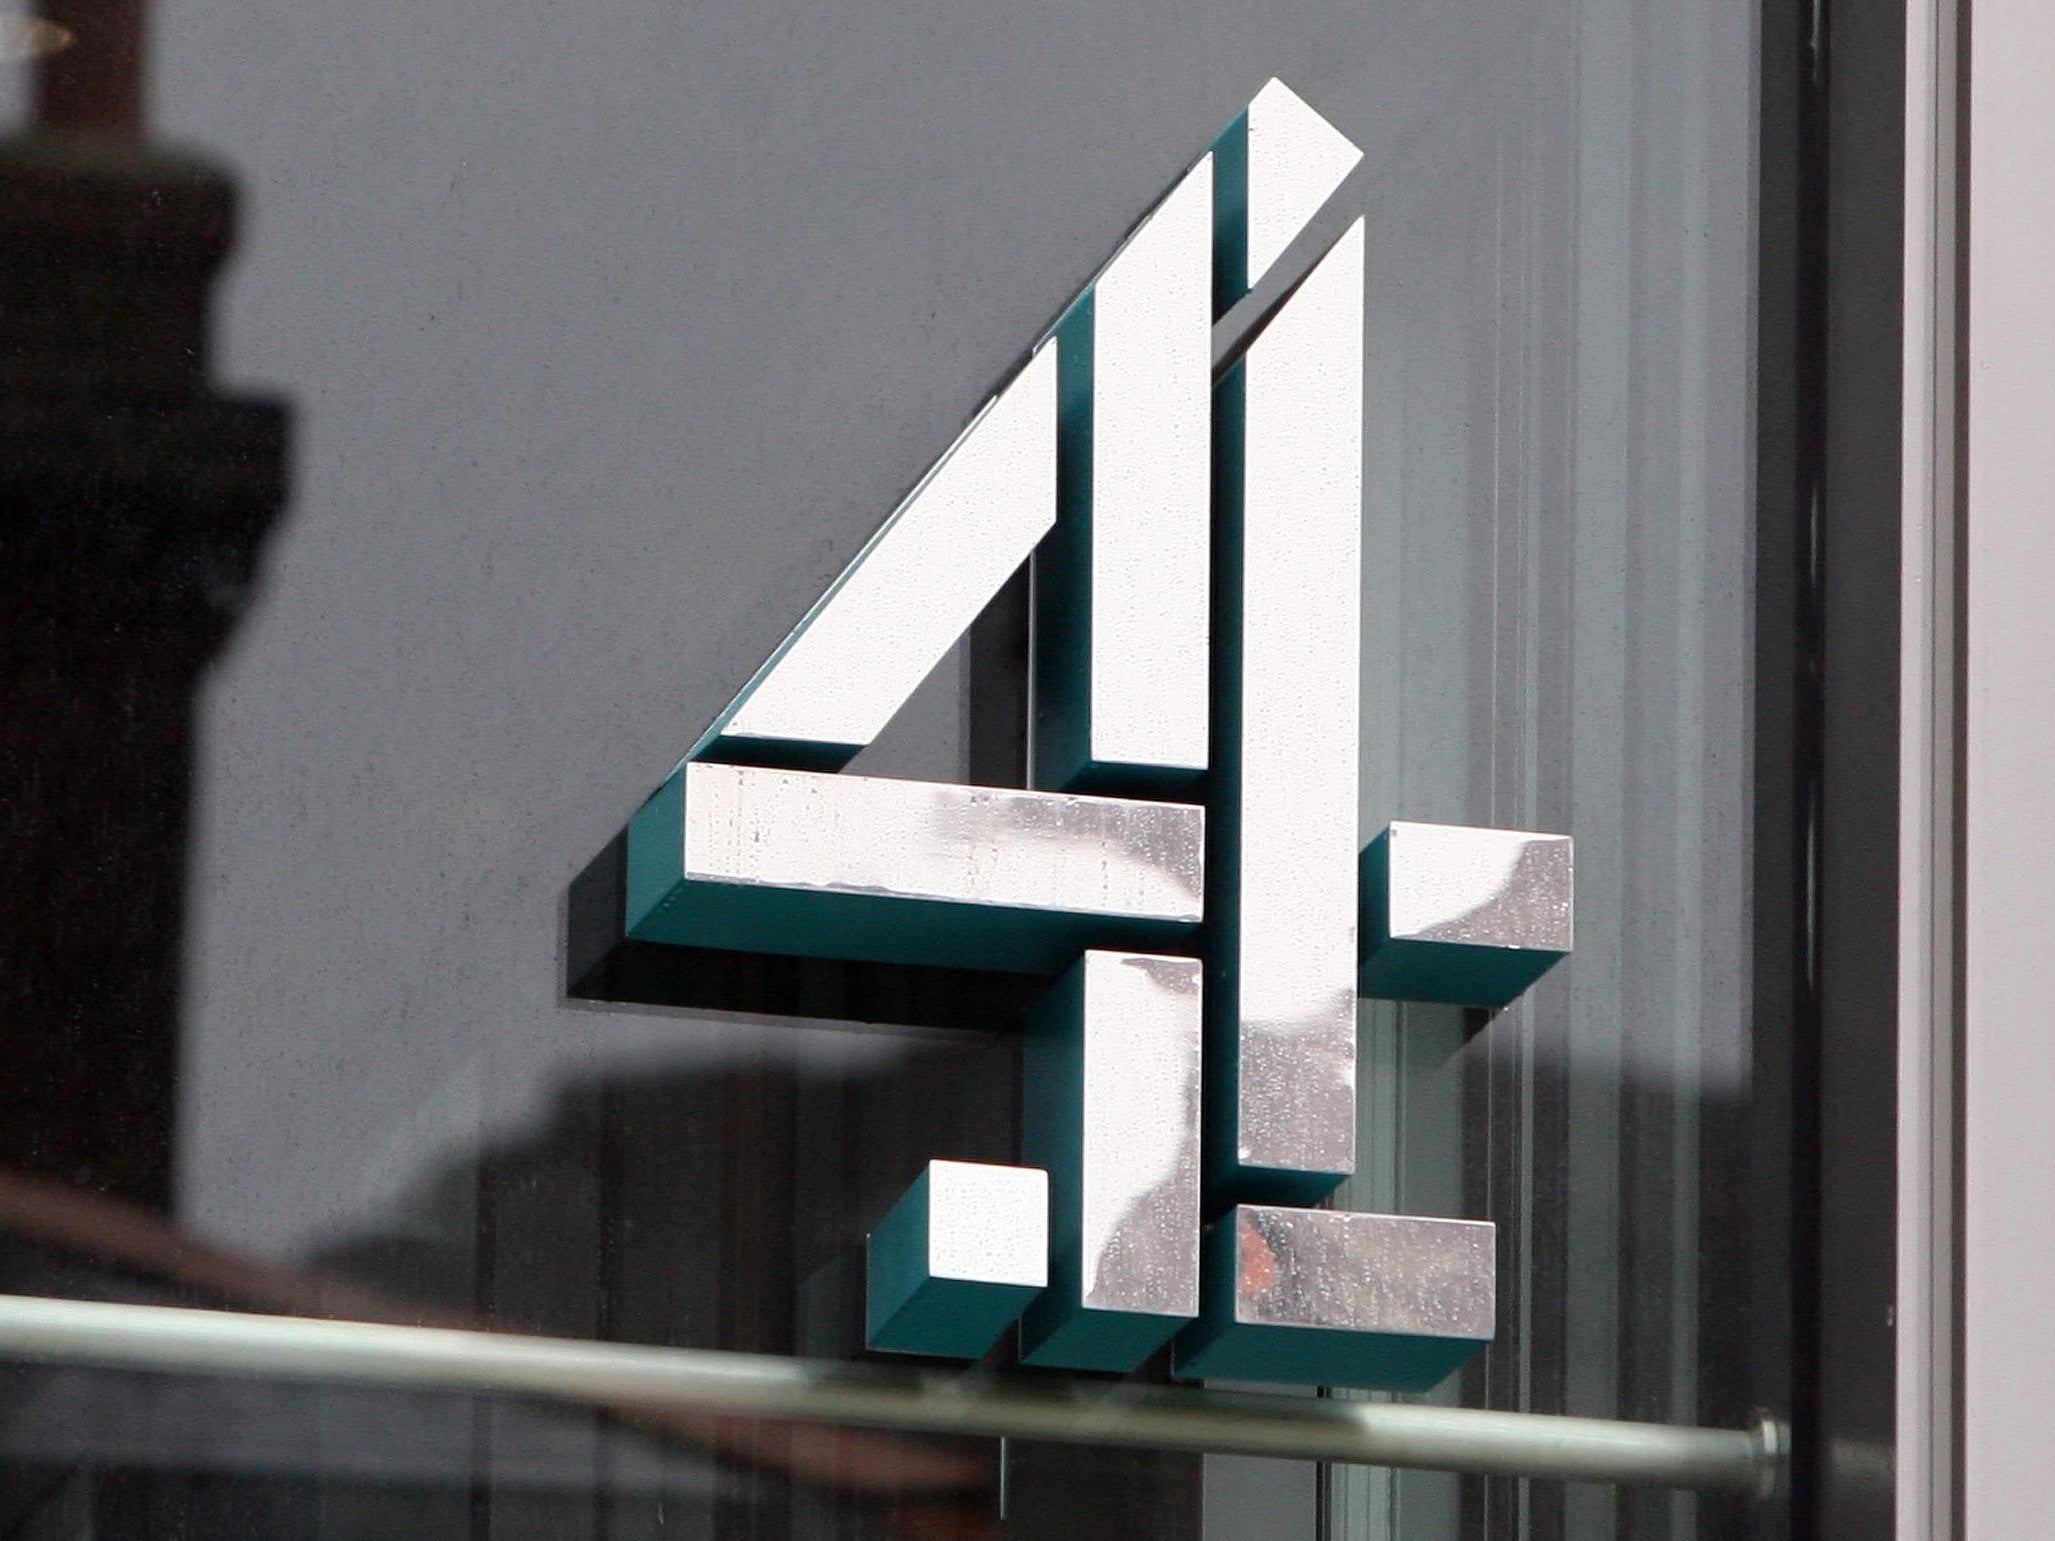 The government is to launch a consultation into the privatisation of Channel 4